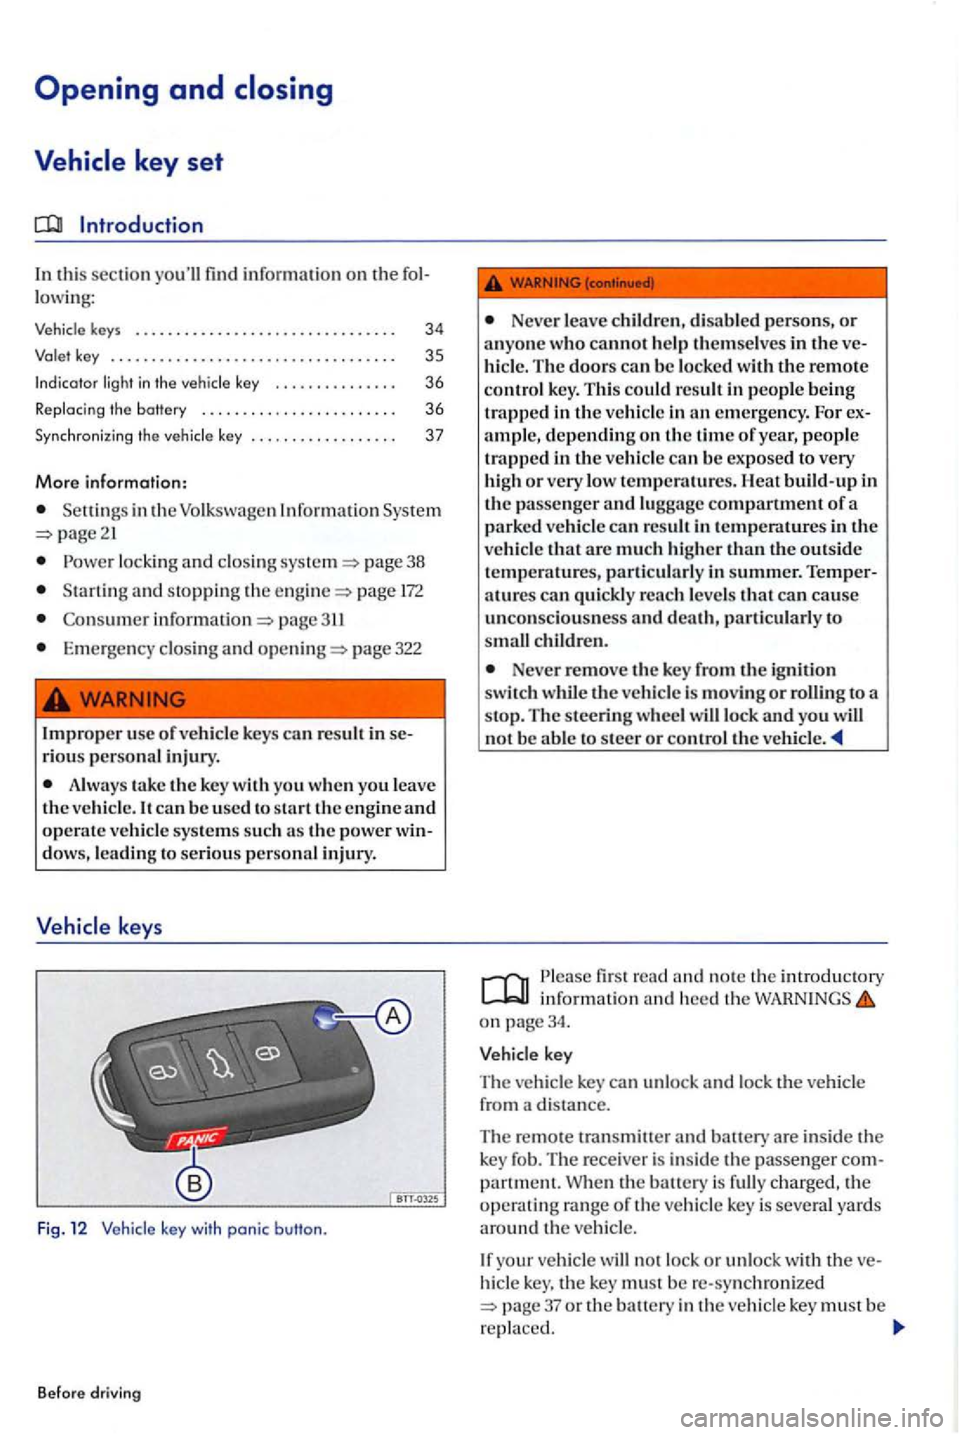 VOLKSWAGEN GOLF PLUS 2006  Owners Manual In this  sec tion find informa tion on th e 
key s . . .  . . . .  . . .  . . . . . . . 
. . .  3 5 
Indicator 
.  . . .  . . 36 
R ep lacing  the battery  . . . . .  . . .  . .  . . . . . . .  . . . 